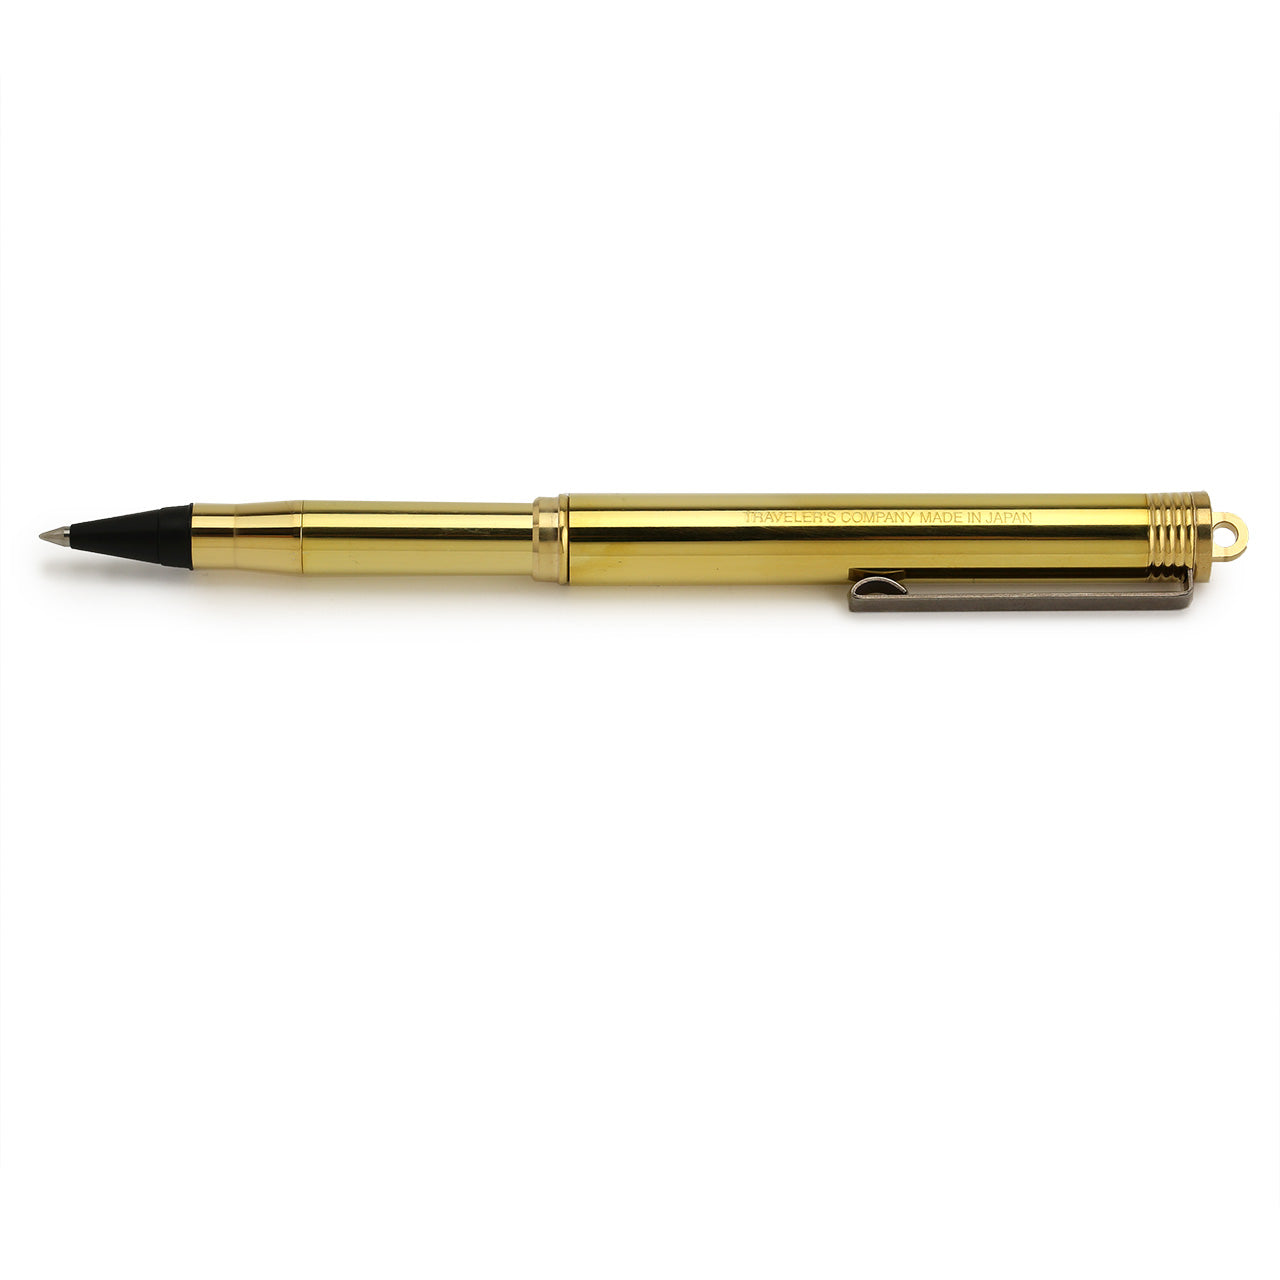 Brass rollerball pen fully assembled with the long cap posted